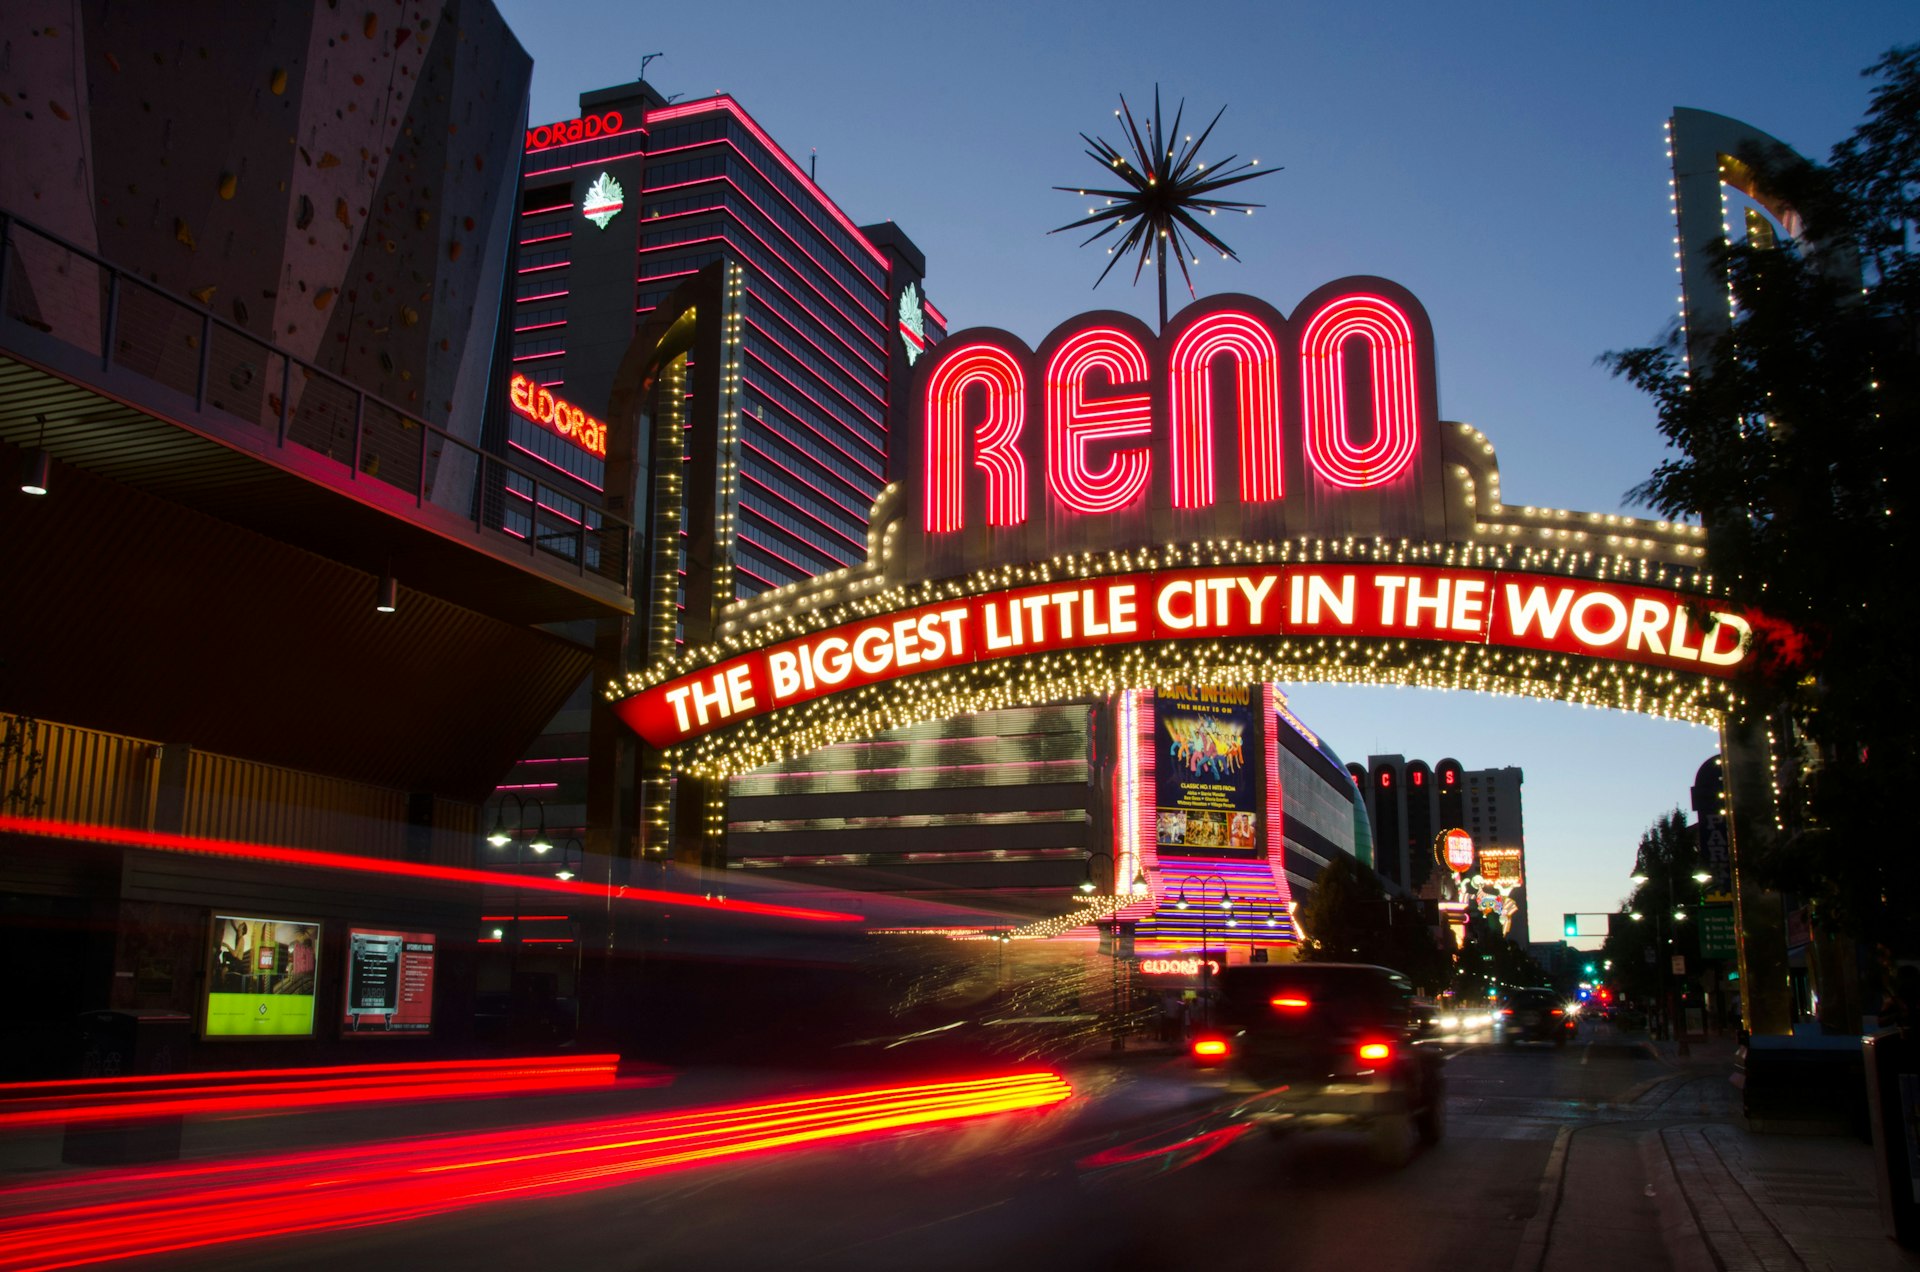 Reno’s nickname was a result of a citywide contest to choose the city’s slogan. Image by Mitch Diamond / Photographer’s Choice / Getty